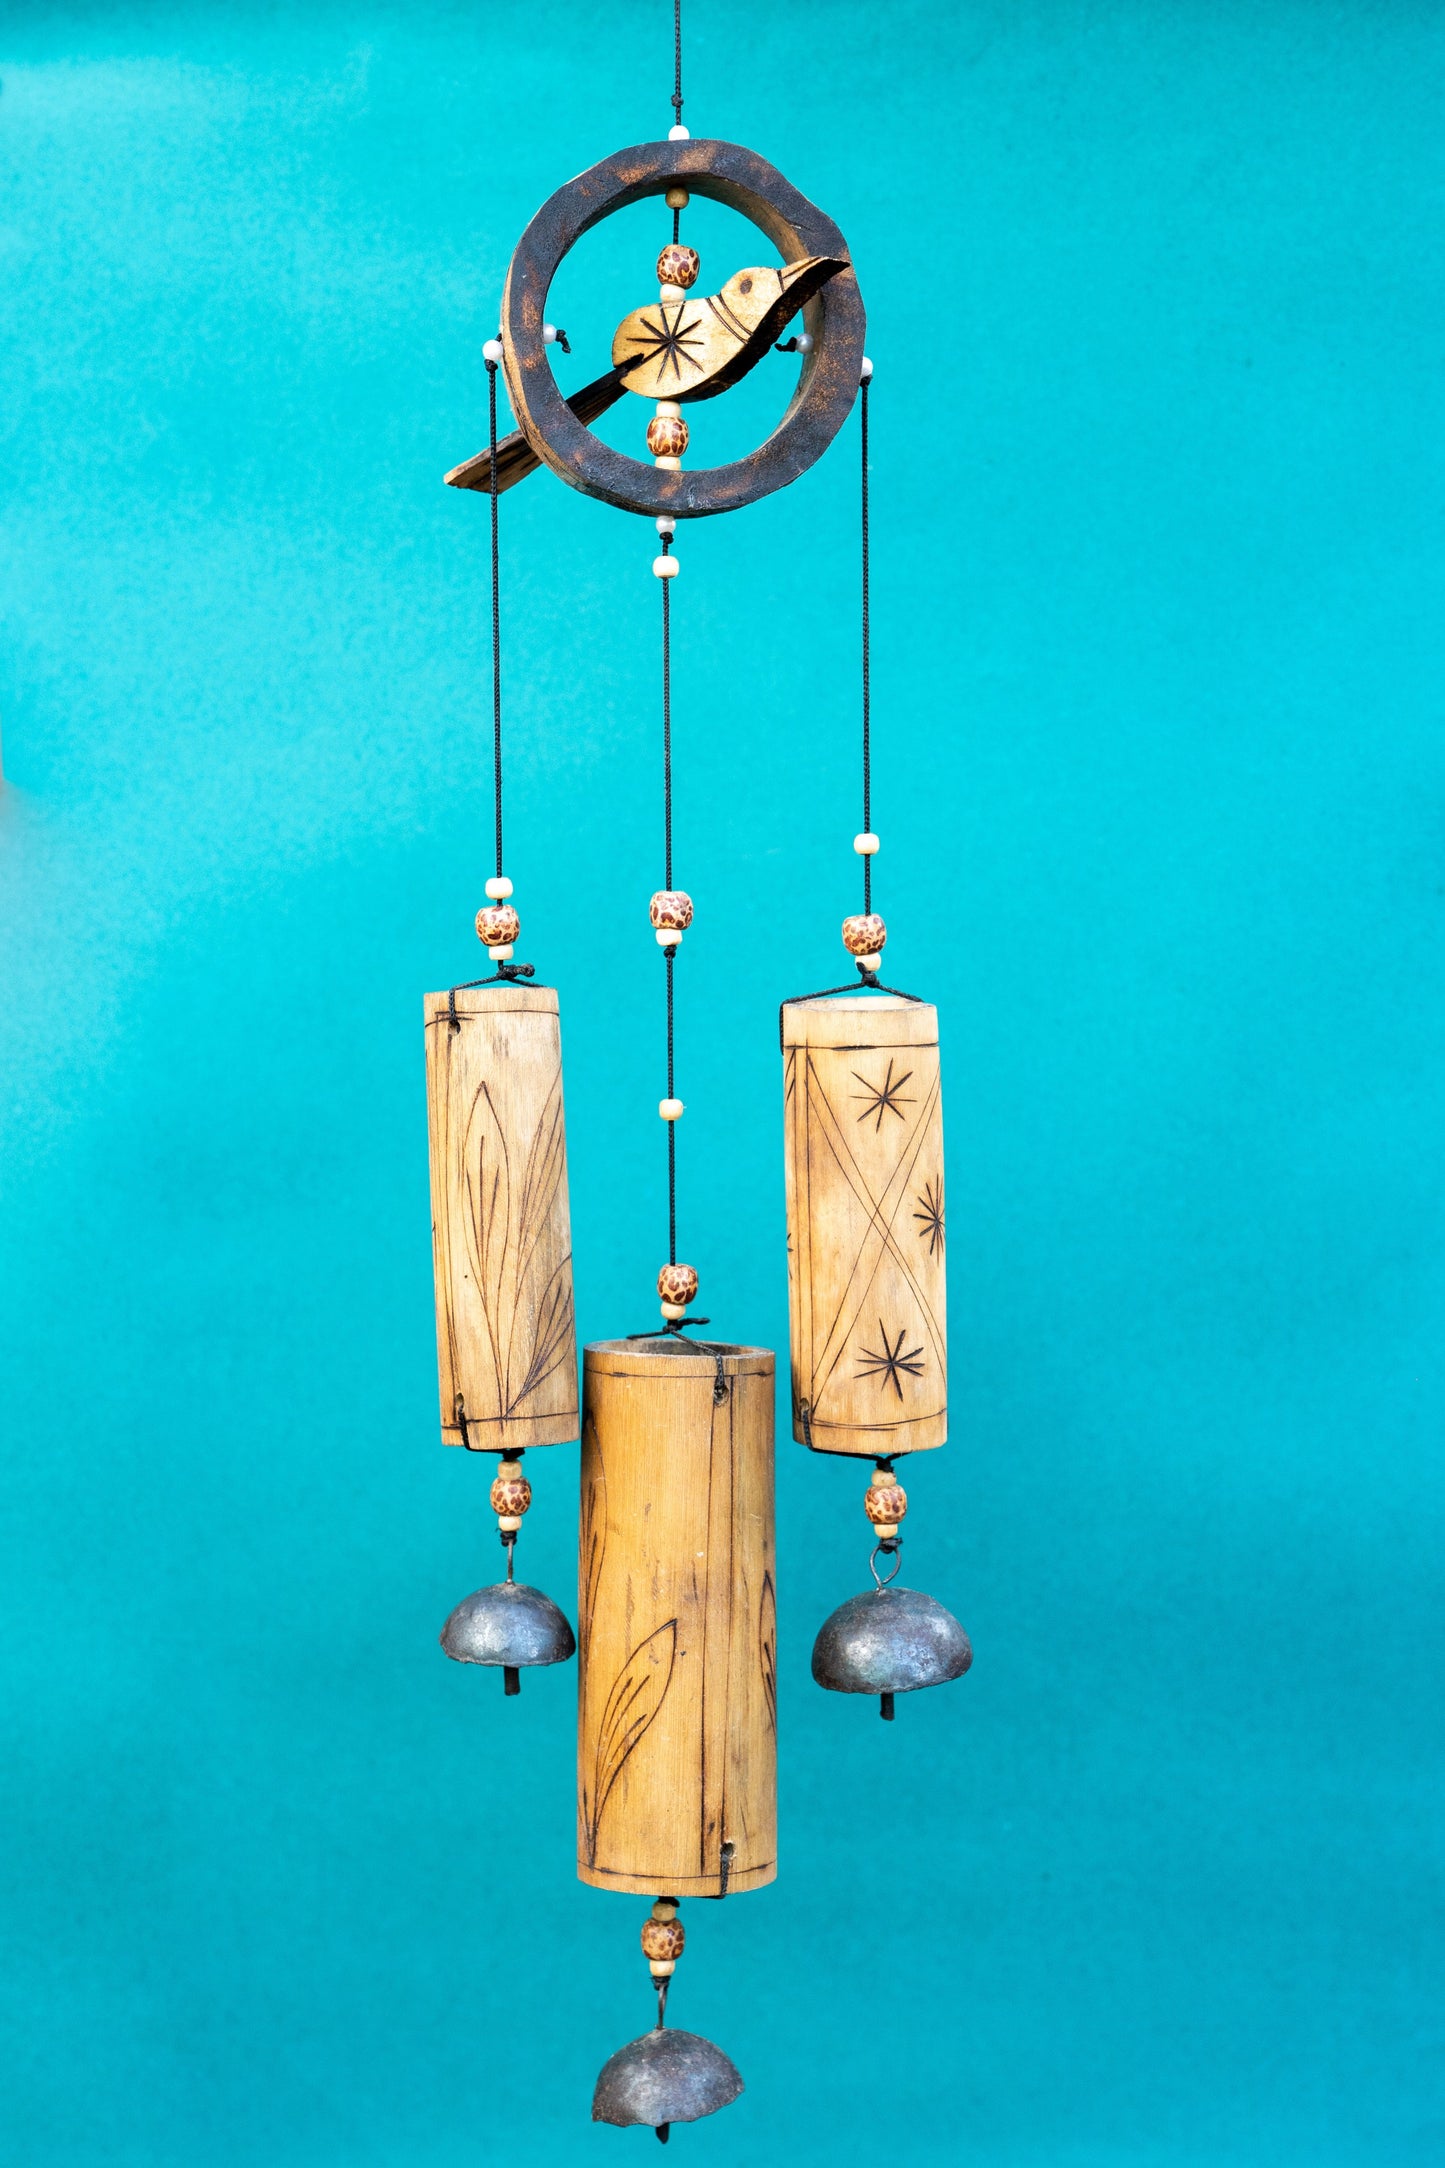 Wind chime 3 Bell